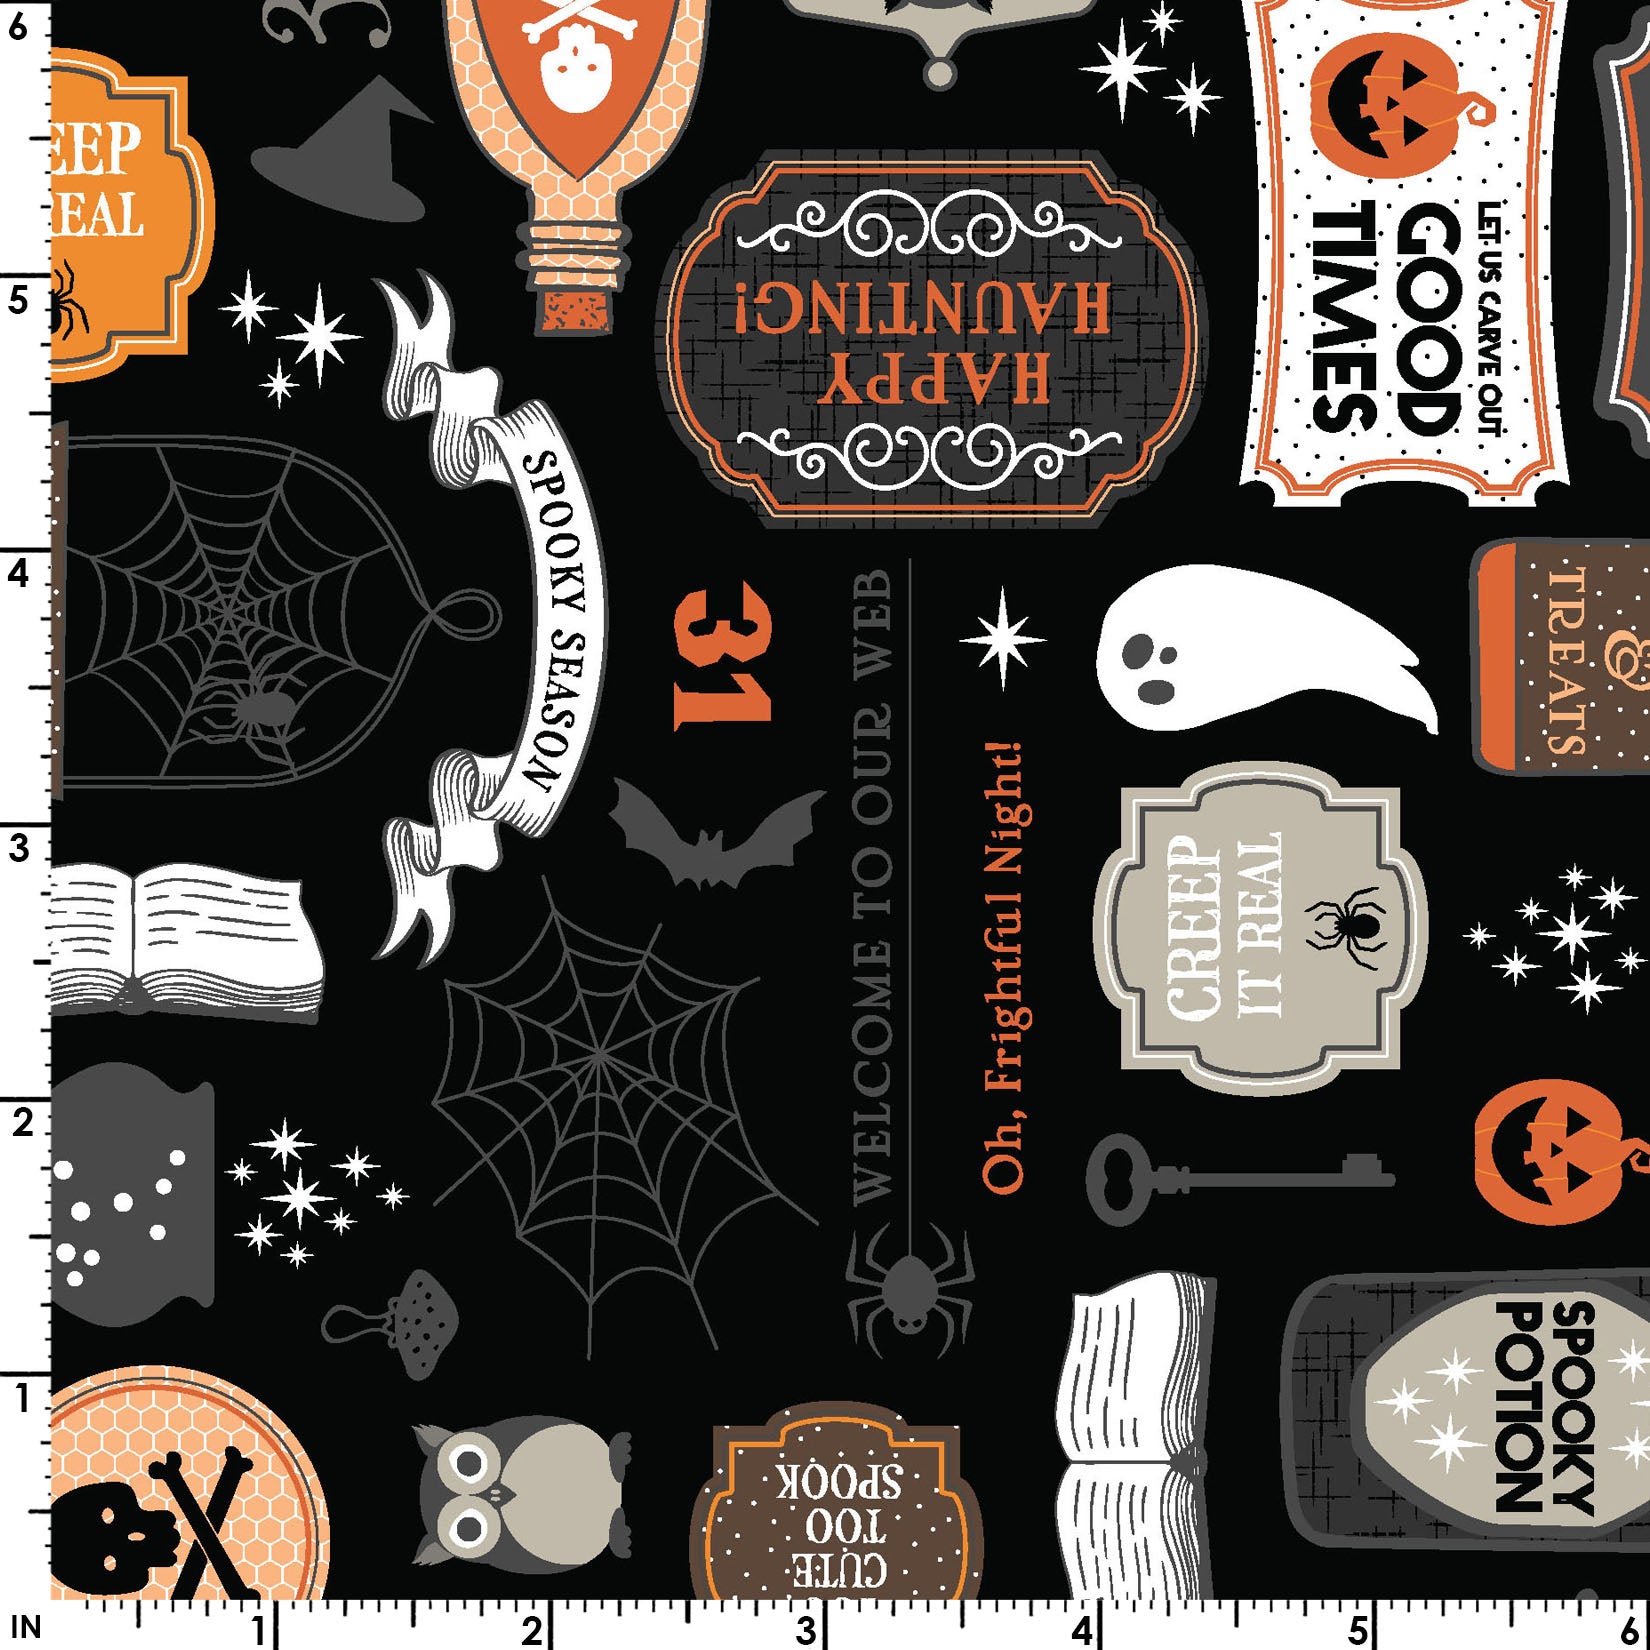 The Potions print on a black background (MAS10570-J) from the Pumpkin and Potions line by Kimberbell for Maywood Studio features elixir bottles, warning signs, ghosts, spiderwebs, and more. Photo shows details of the designs with a ruler to show the scale.